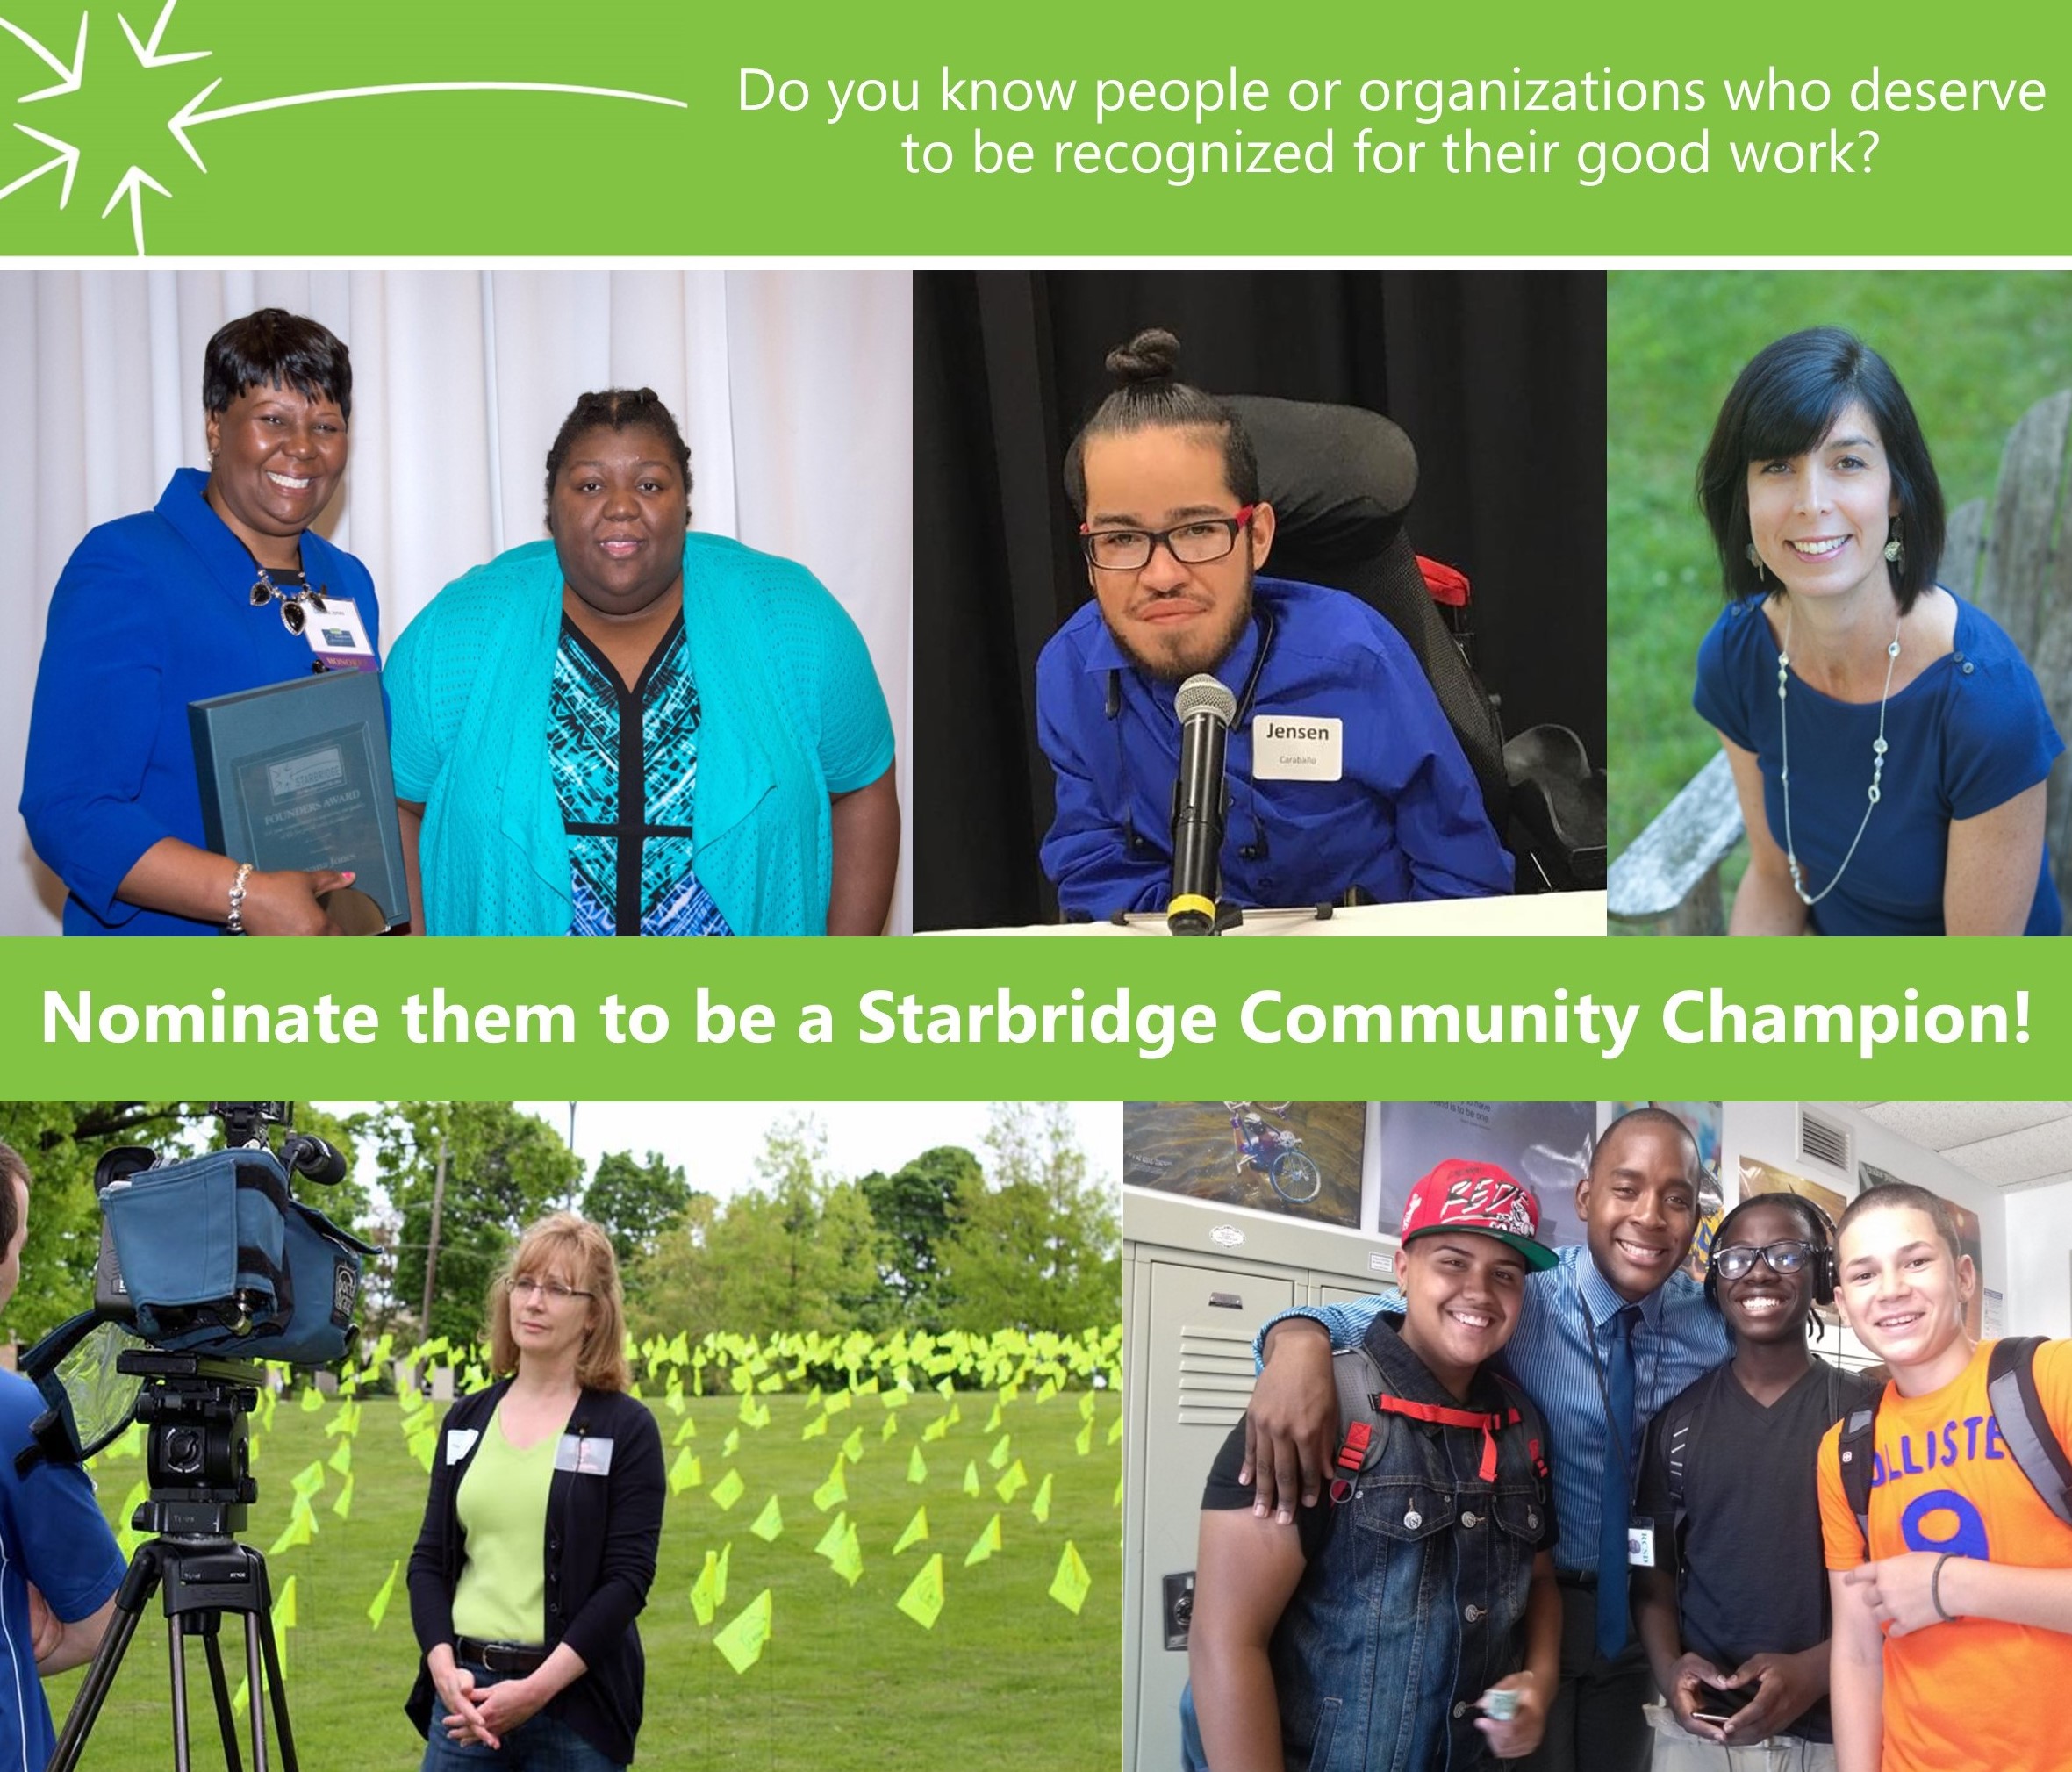 Collage showing diverse group of Community Champions